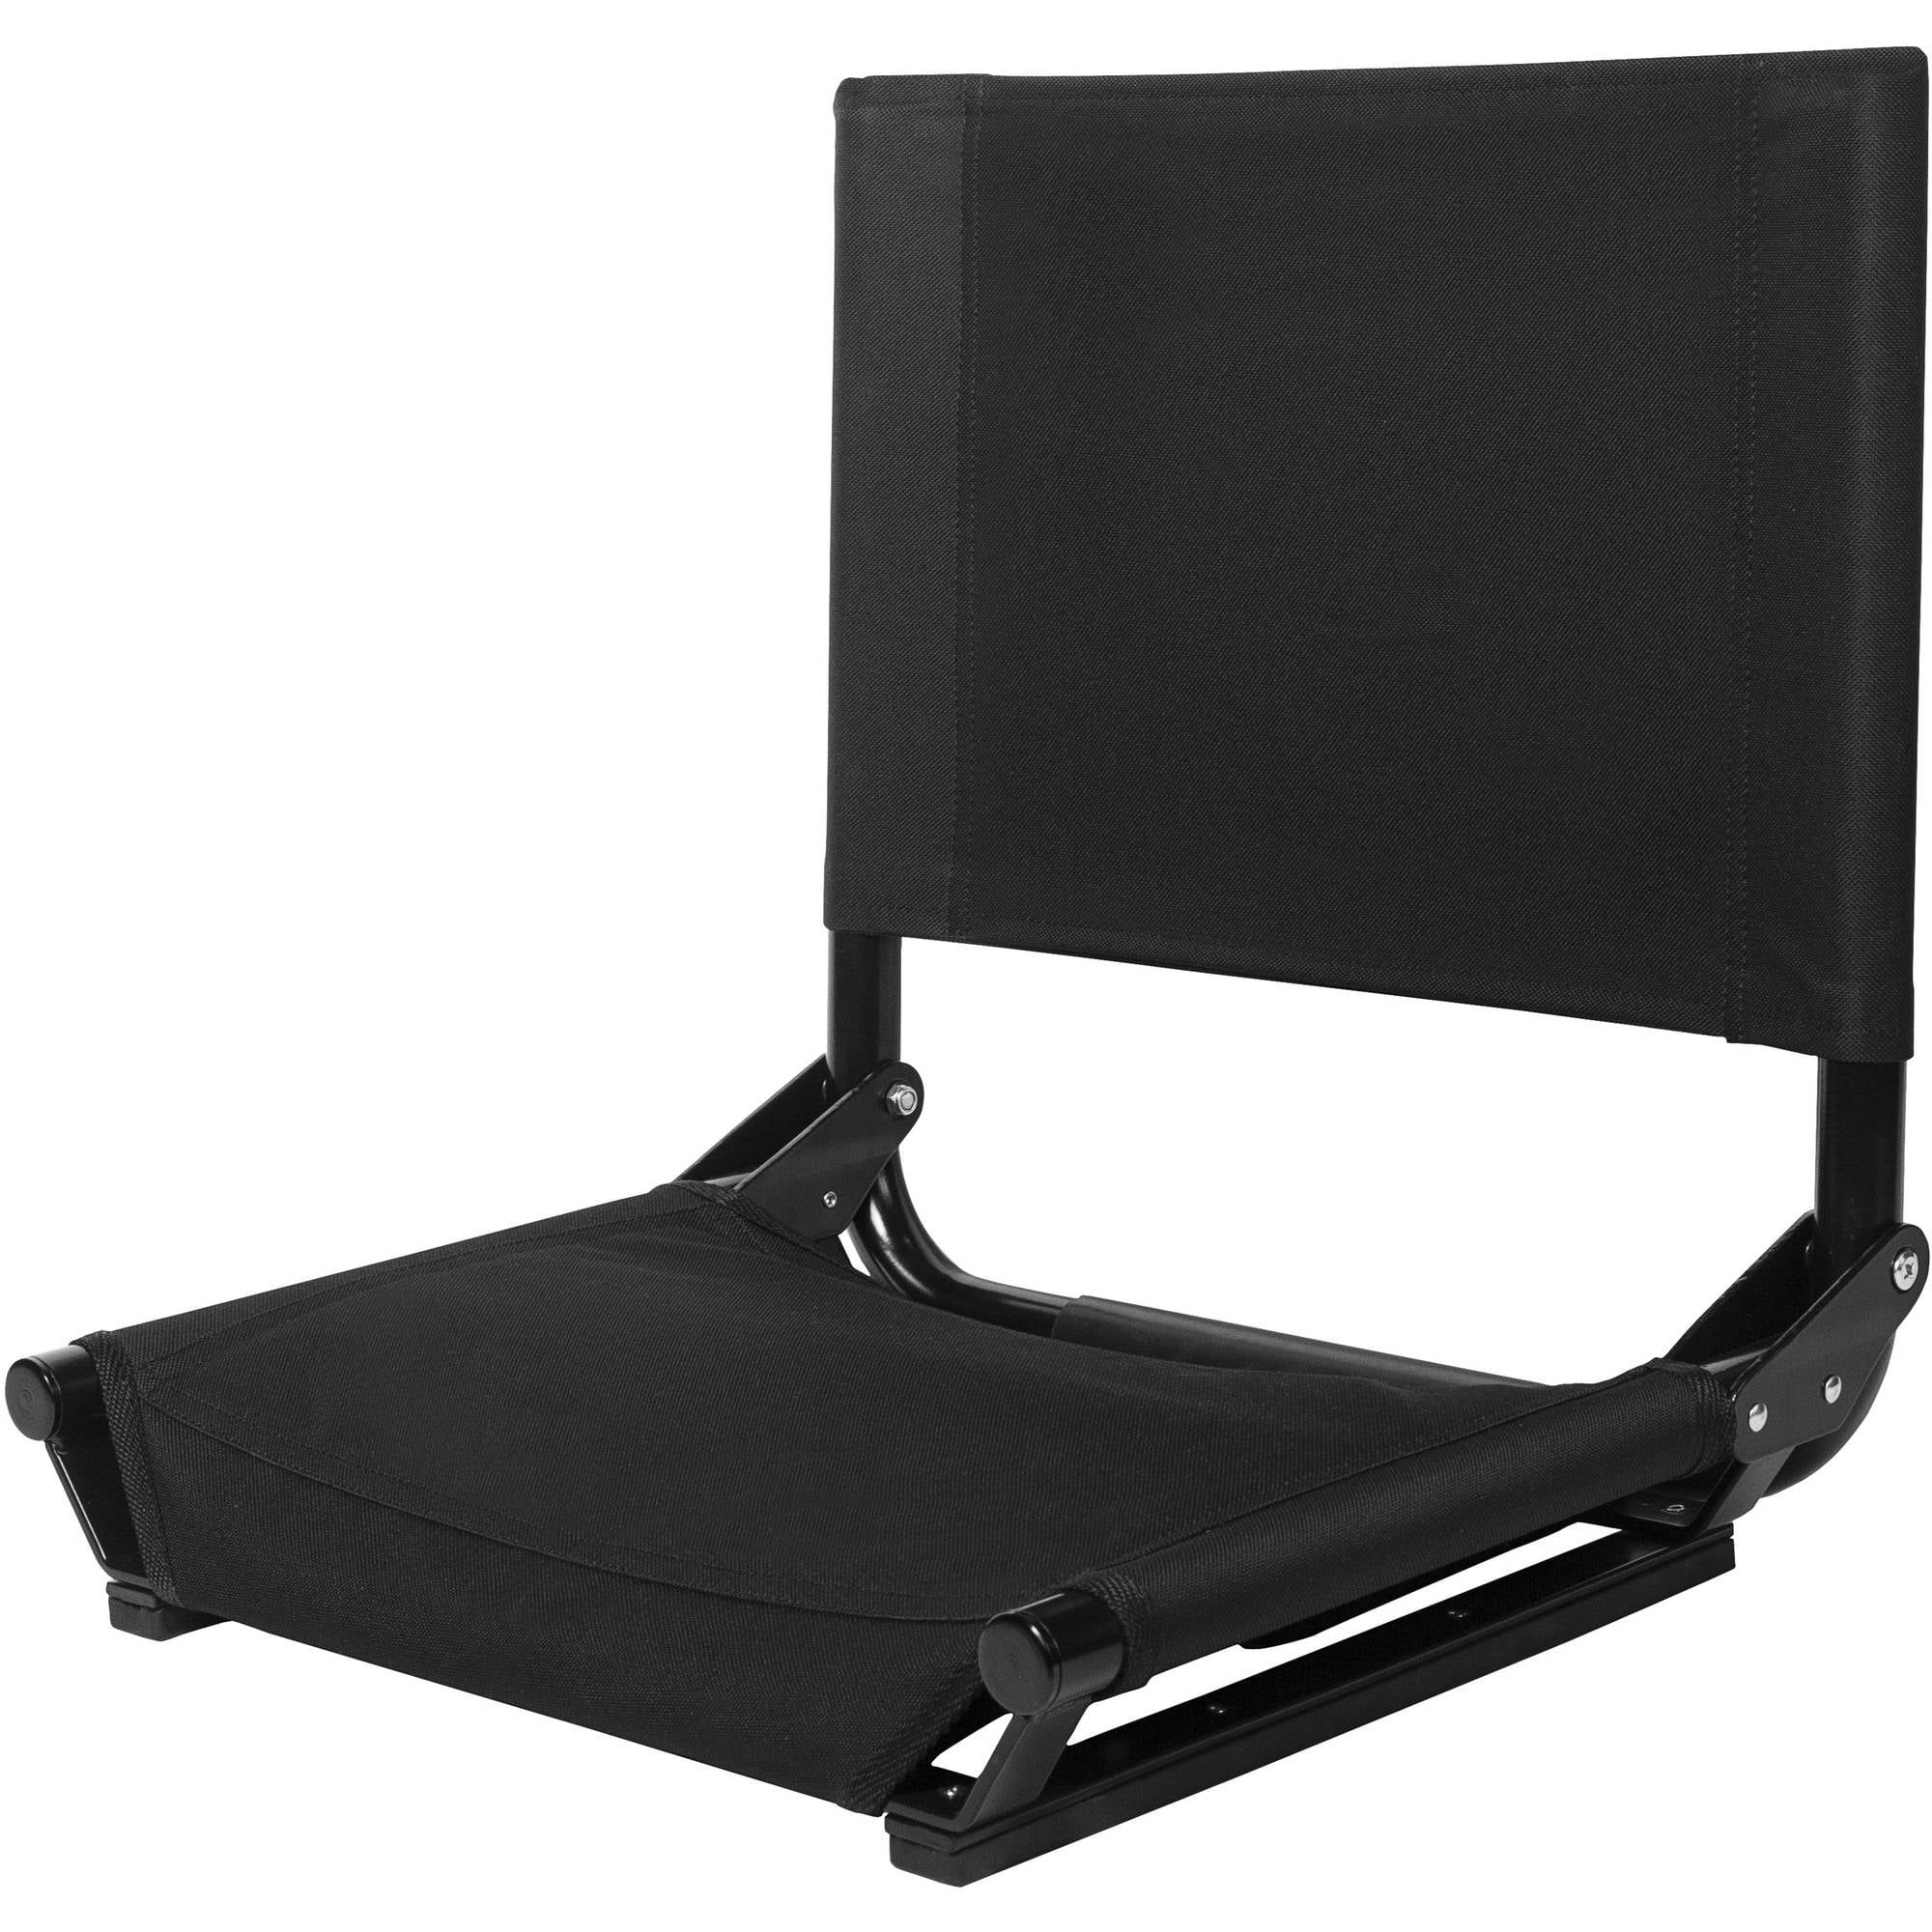 One Size Black Cascade Mountain Tech Deluxe Padded Stadium Seat for Bleachers